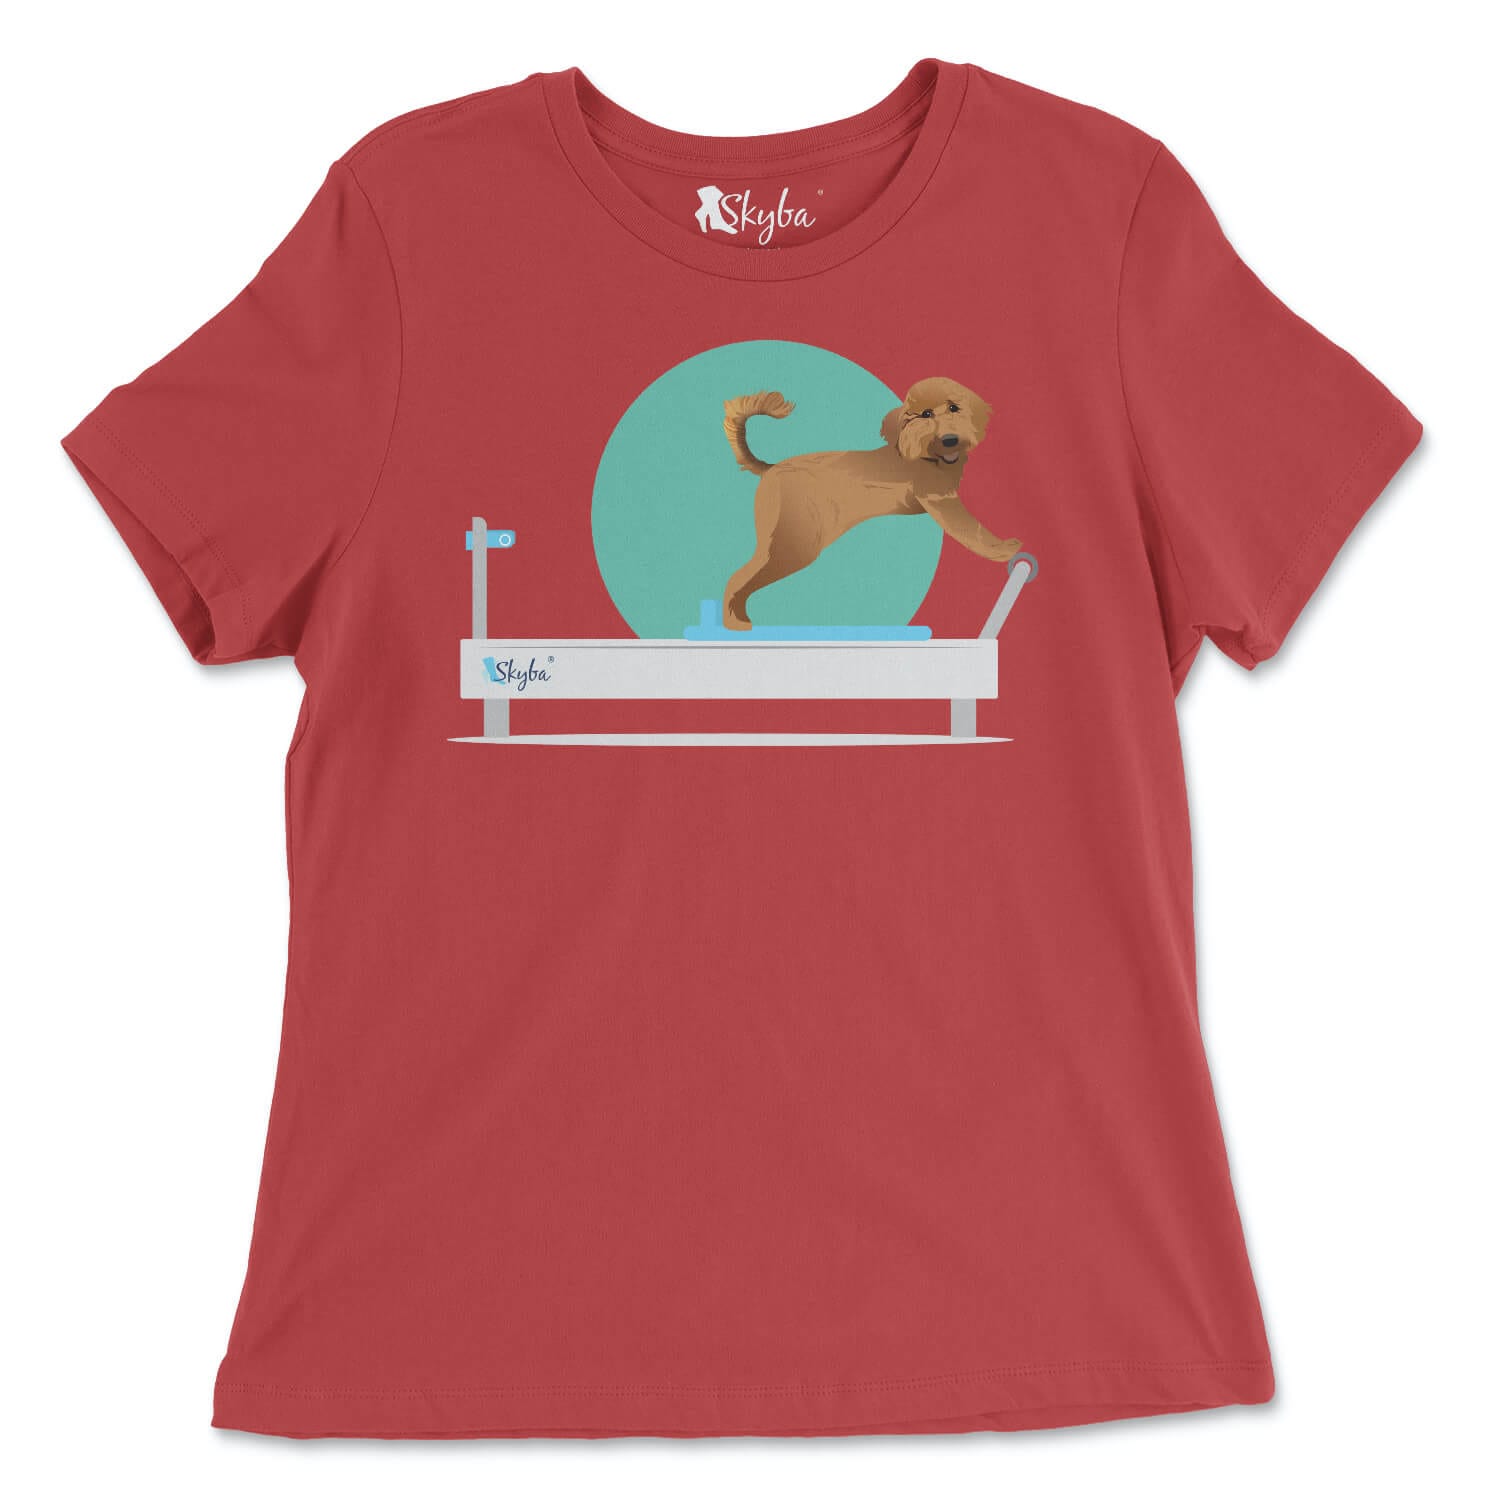 Goldendoodle on Reformer - Classic Tee Skyba T-Shirt